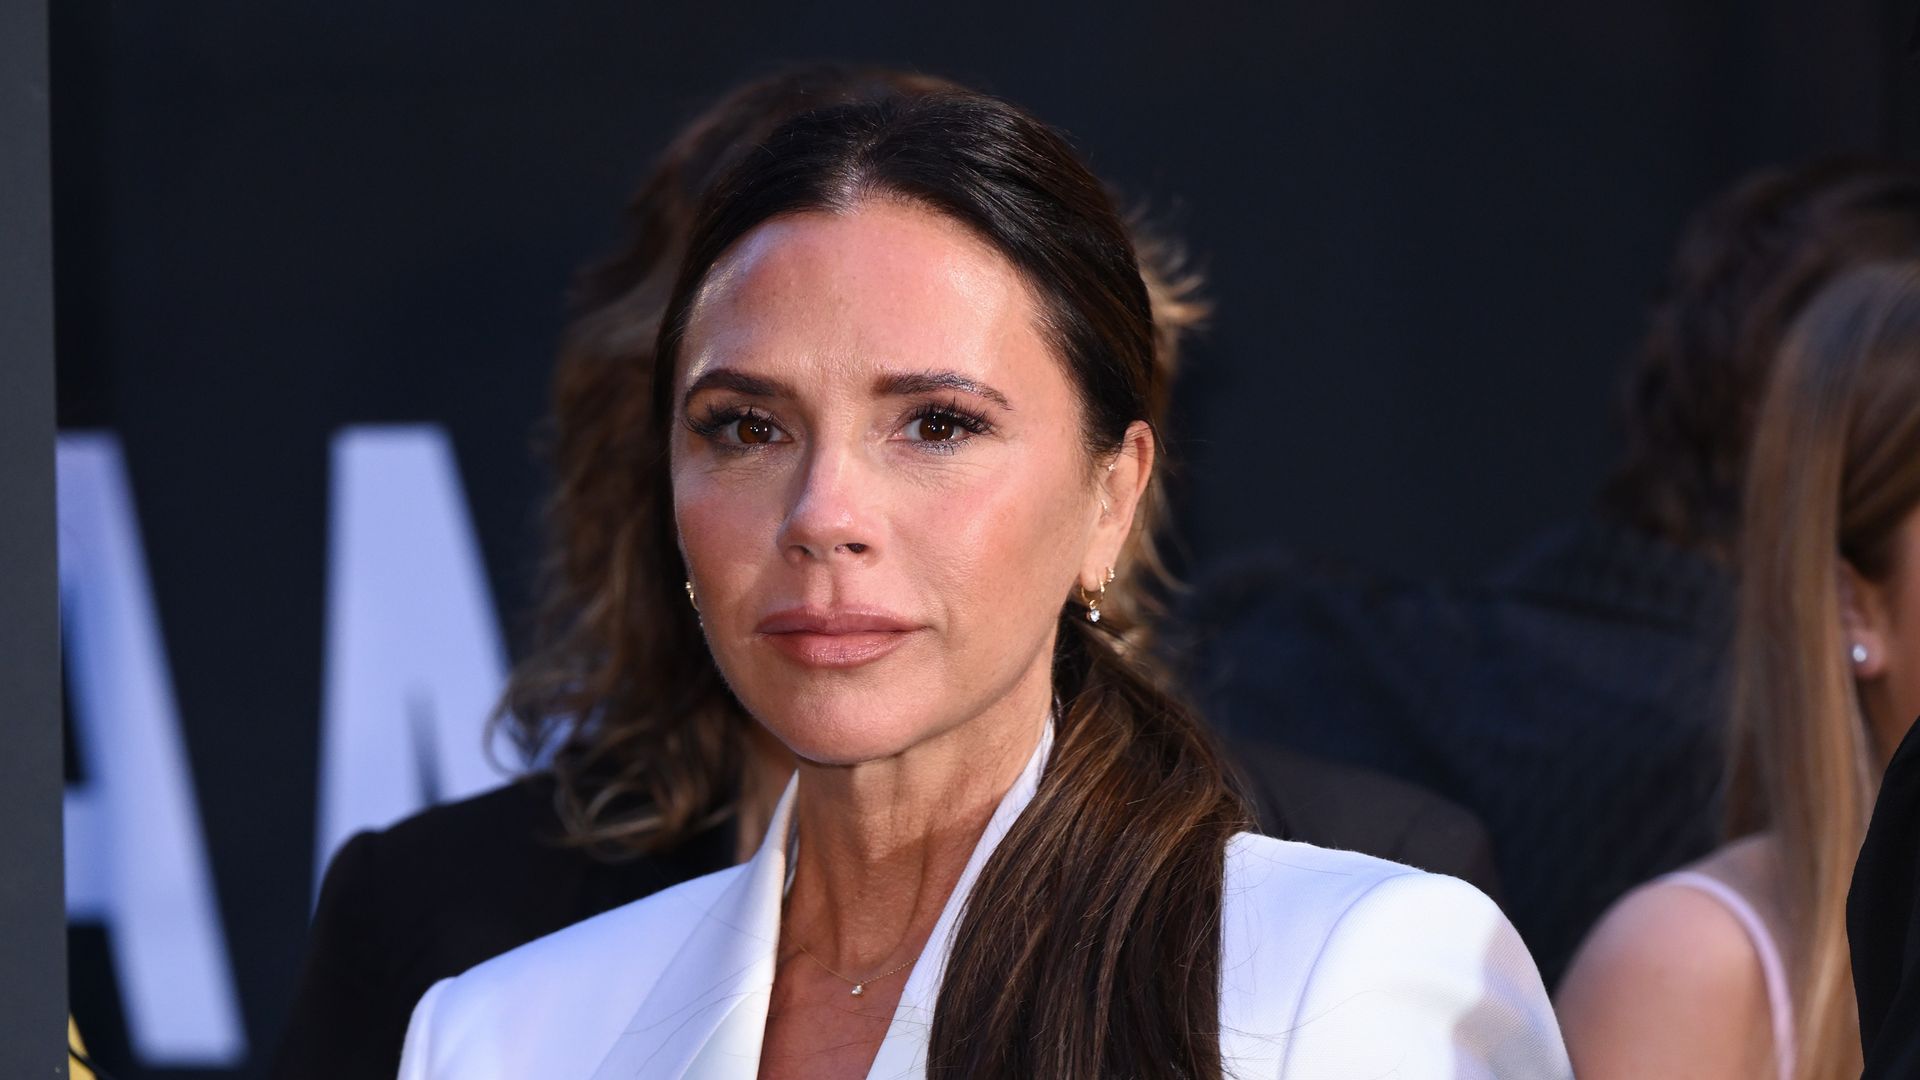 Victoria Beckham’s ‘quiet night in’ outfit is honestly super glam | HELLO!